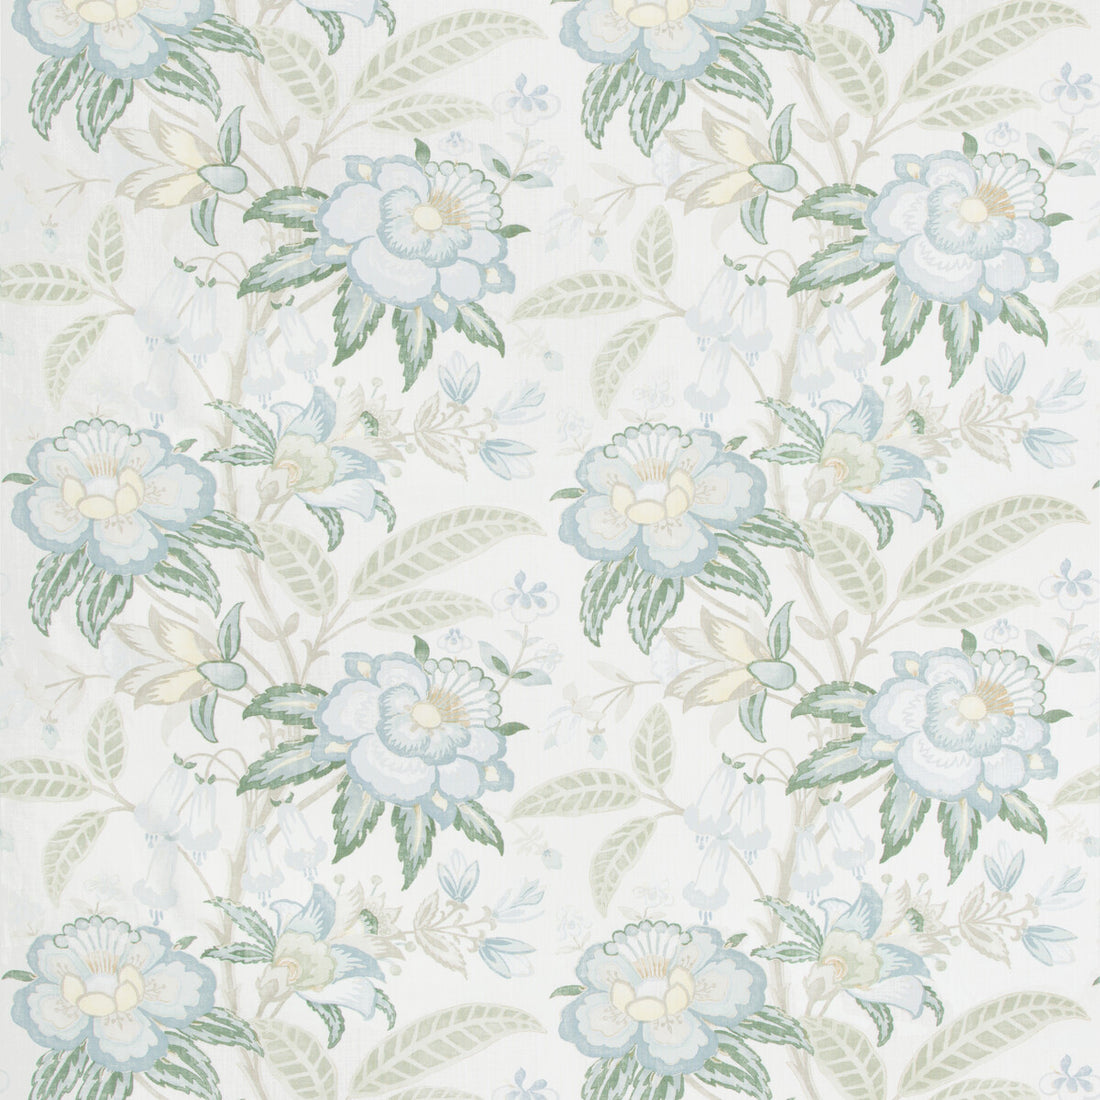 Davenport Print fabric in sea mist color - pattern 2017164.153.0 - by Lee Jofa in the Westport collection